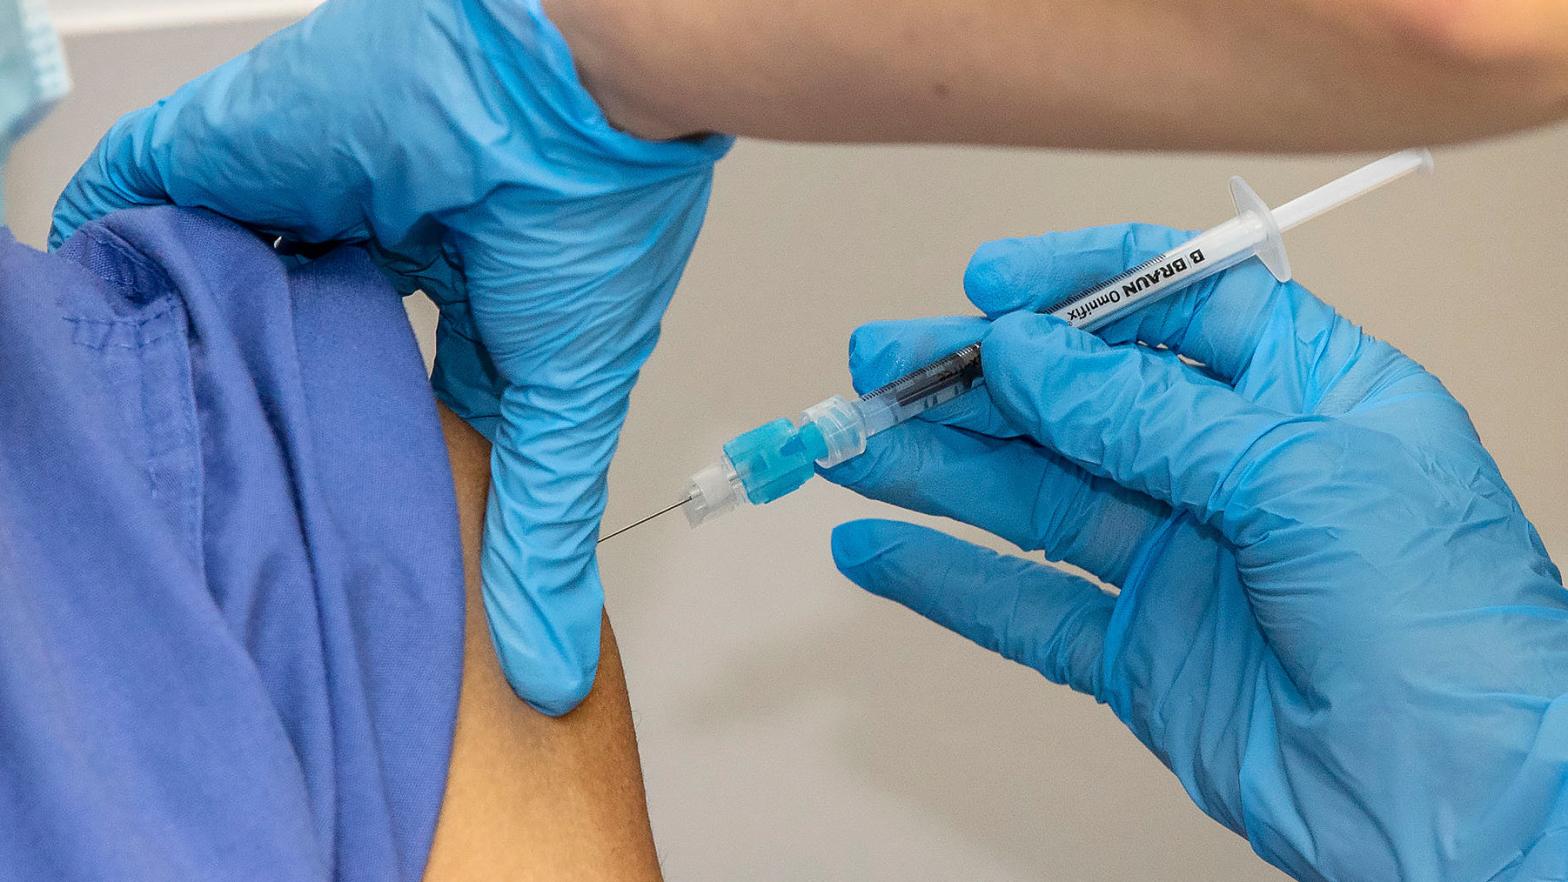 Healthcare workers receive an injection of the Pfizer-BioNTech Covid-19 vaccine at St James's Hospital in Dublin on December 29, 2020.  (Photo: Marc O’Sullivan, Getty Images)